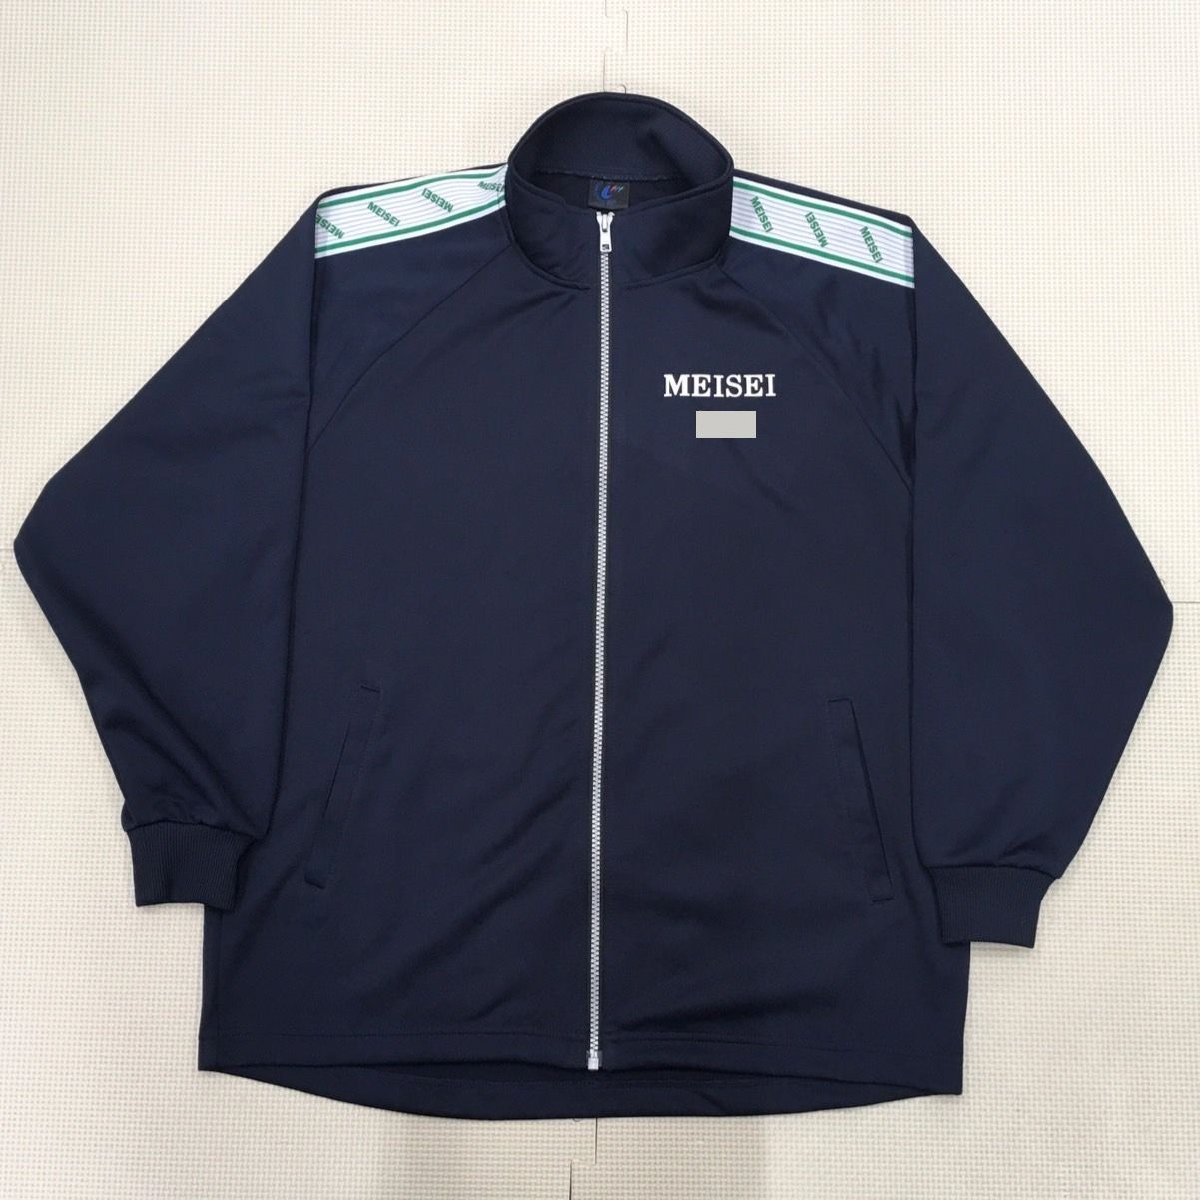 A295/S997 ( used ) Tokyo Metropolitan area private shining star junior high school gym uniform 1 point /S/ long sleeve /UNITIKA MATE/ navy blue / white × green / short period put on supplies / gym uniform / jersey / motion put on 